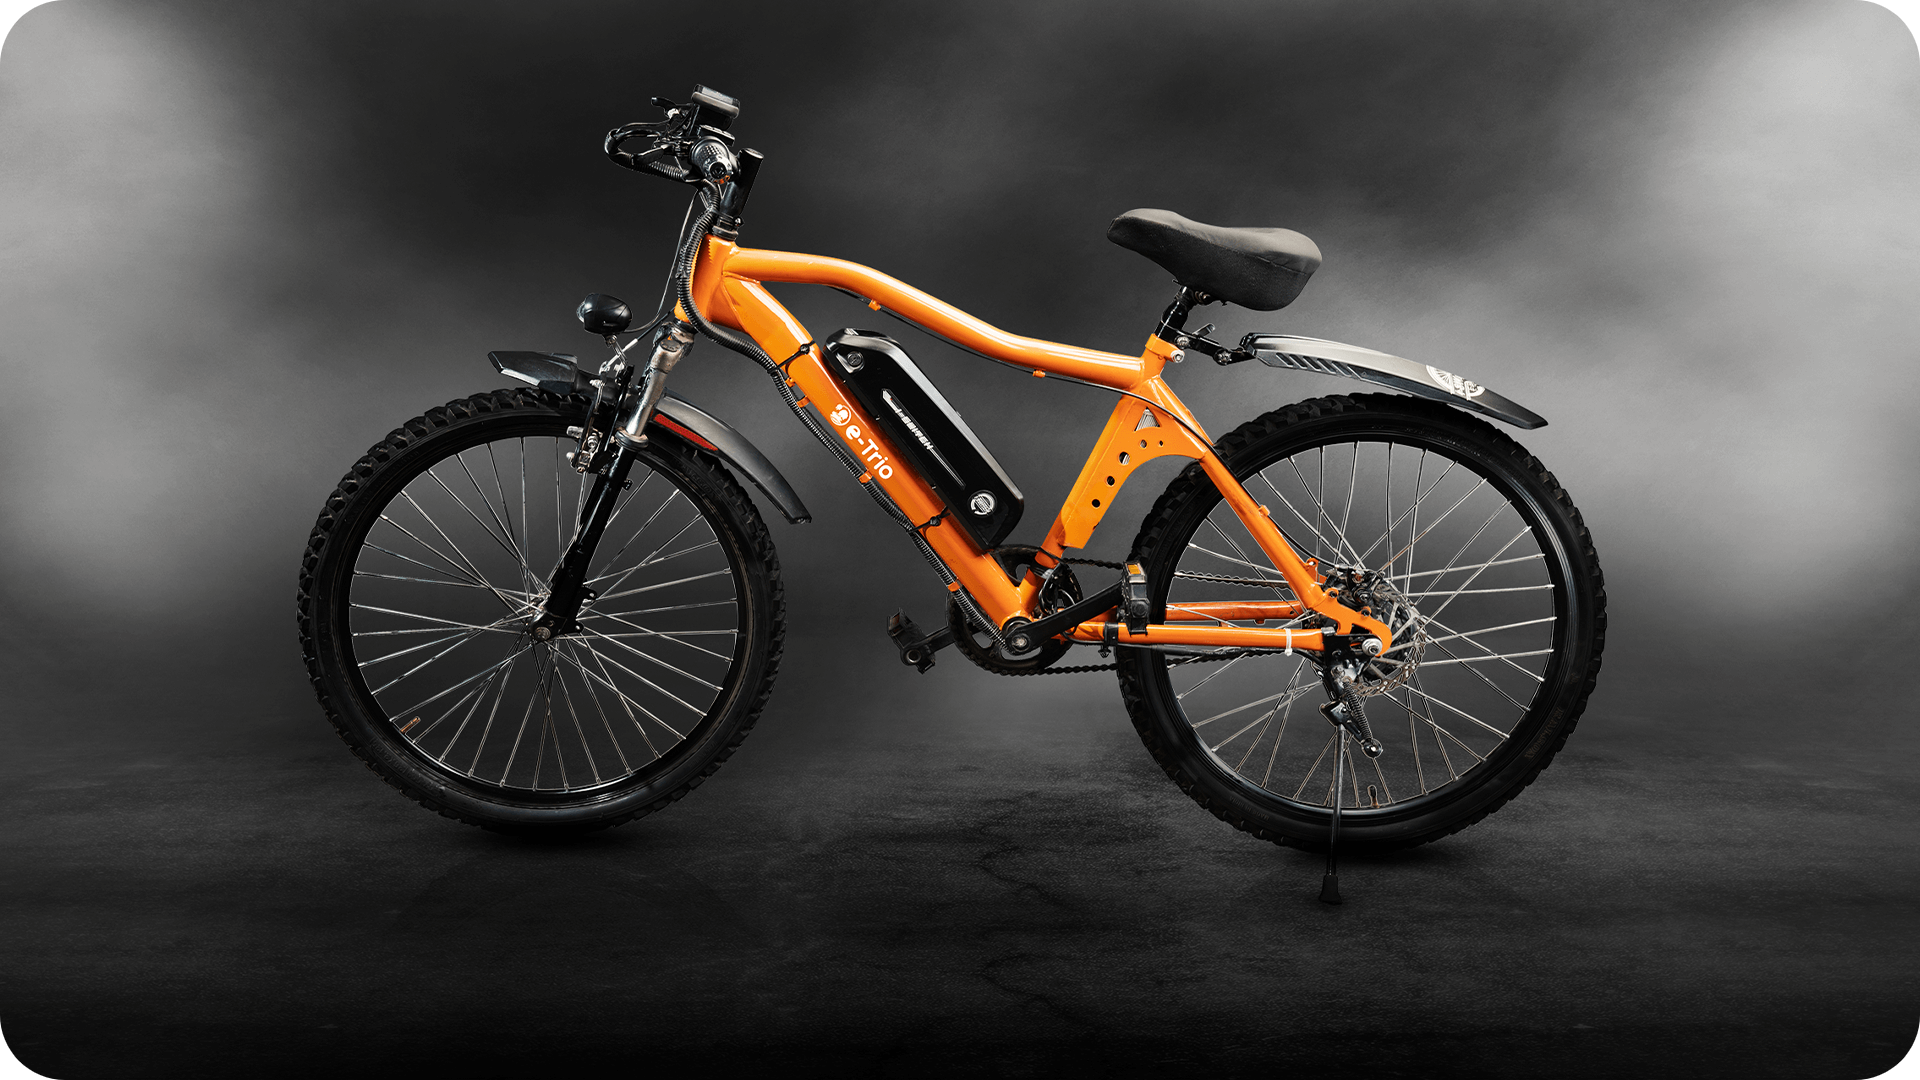 https://e-vehicleinfo.com/top-5-electric-bicycle-manufacturers-in-india-e-bicycle/